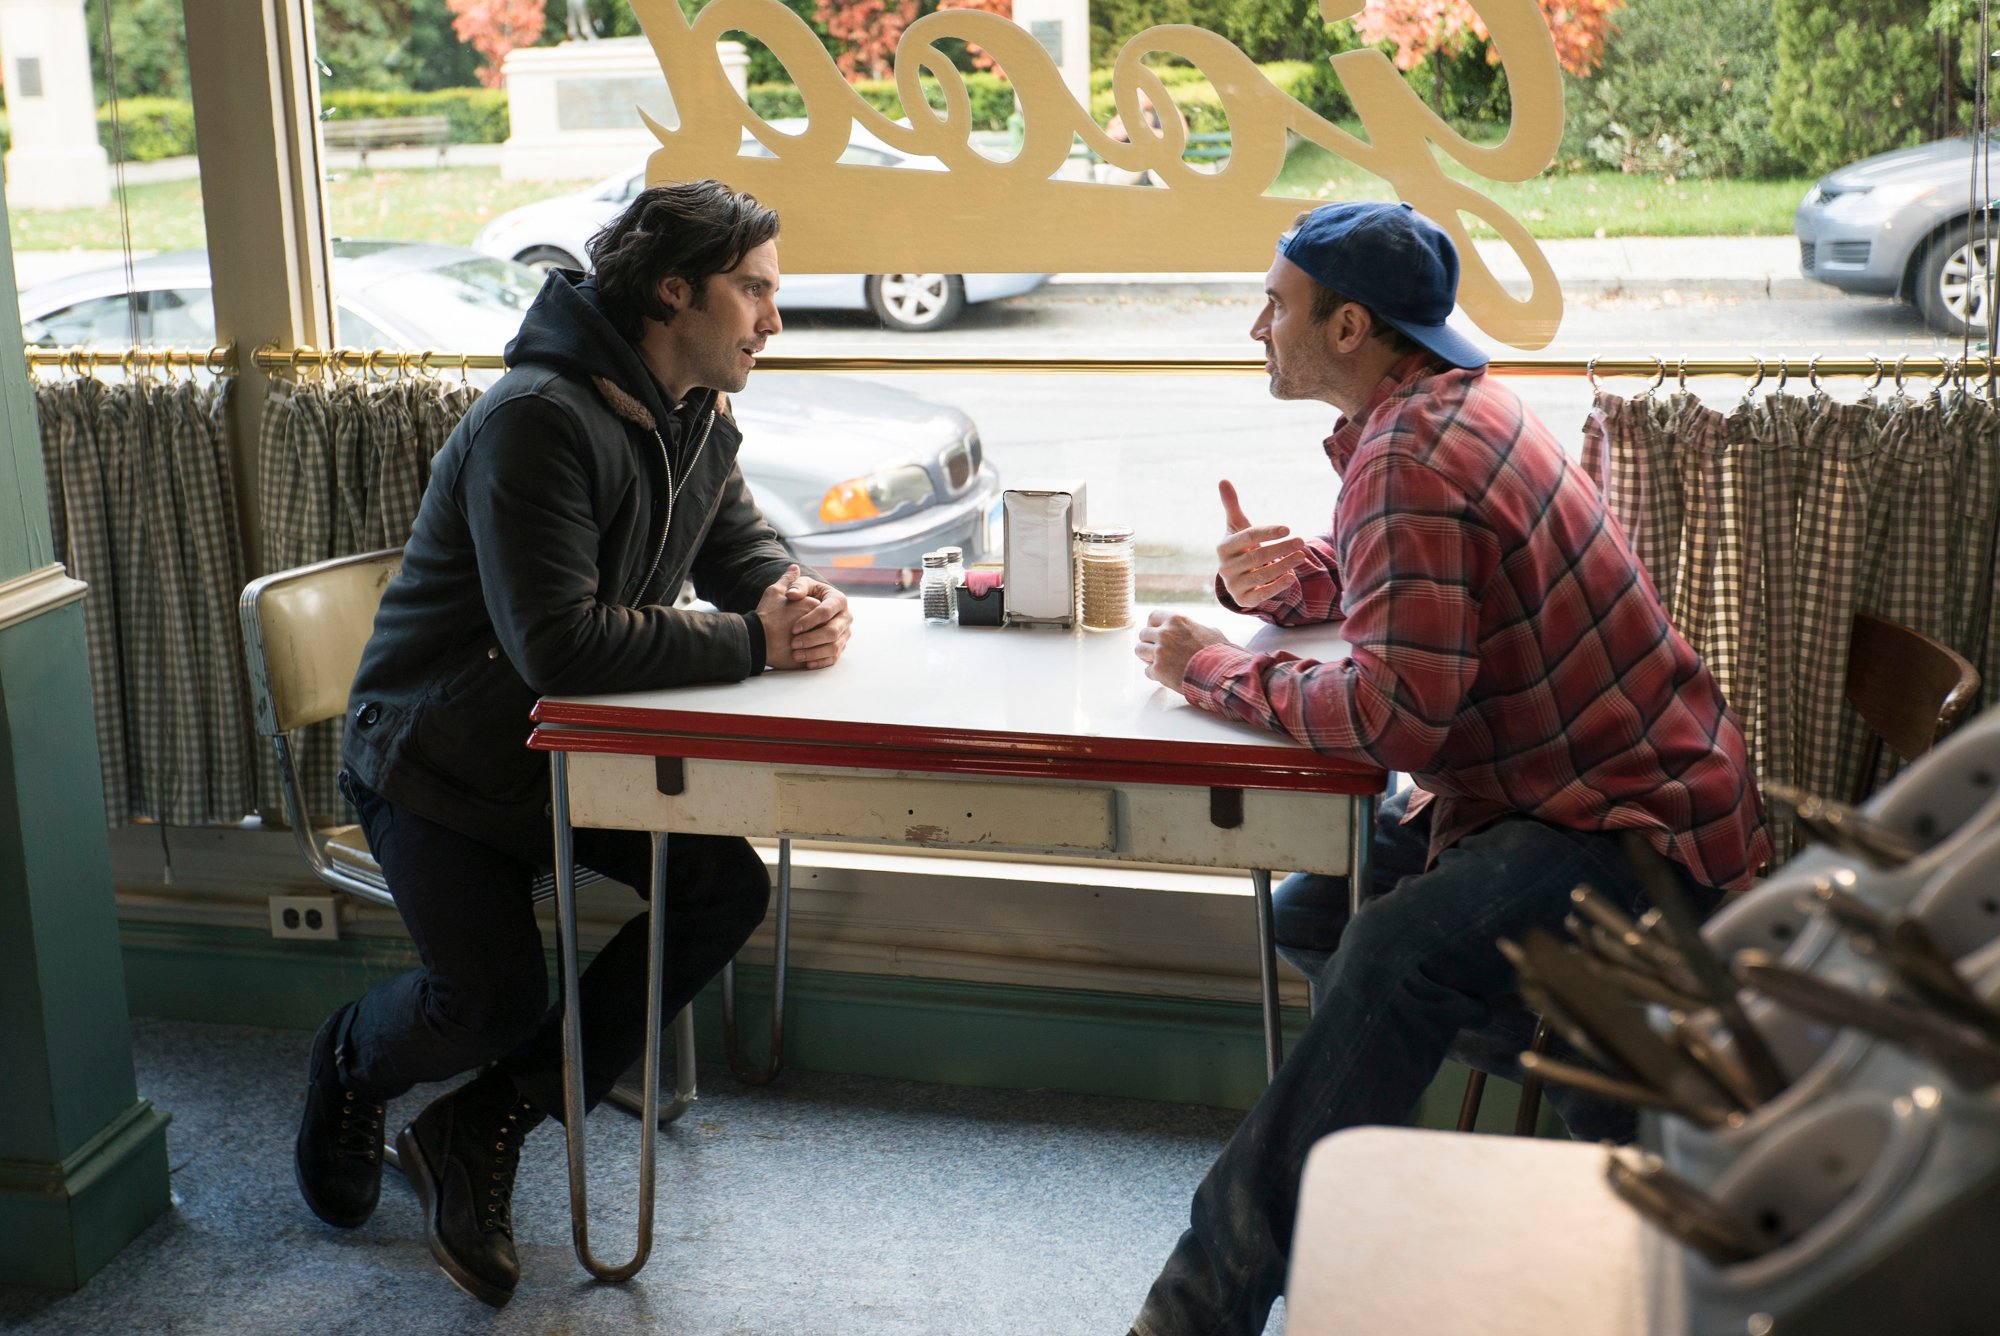 Milo Ventimiglia and Scott Patterson as Jess and Luke in 'Gilmore Girls: A Year in the Life' on Netflix. They're sitting at a table in Luke's Diner.